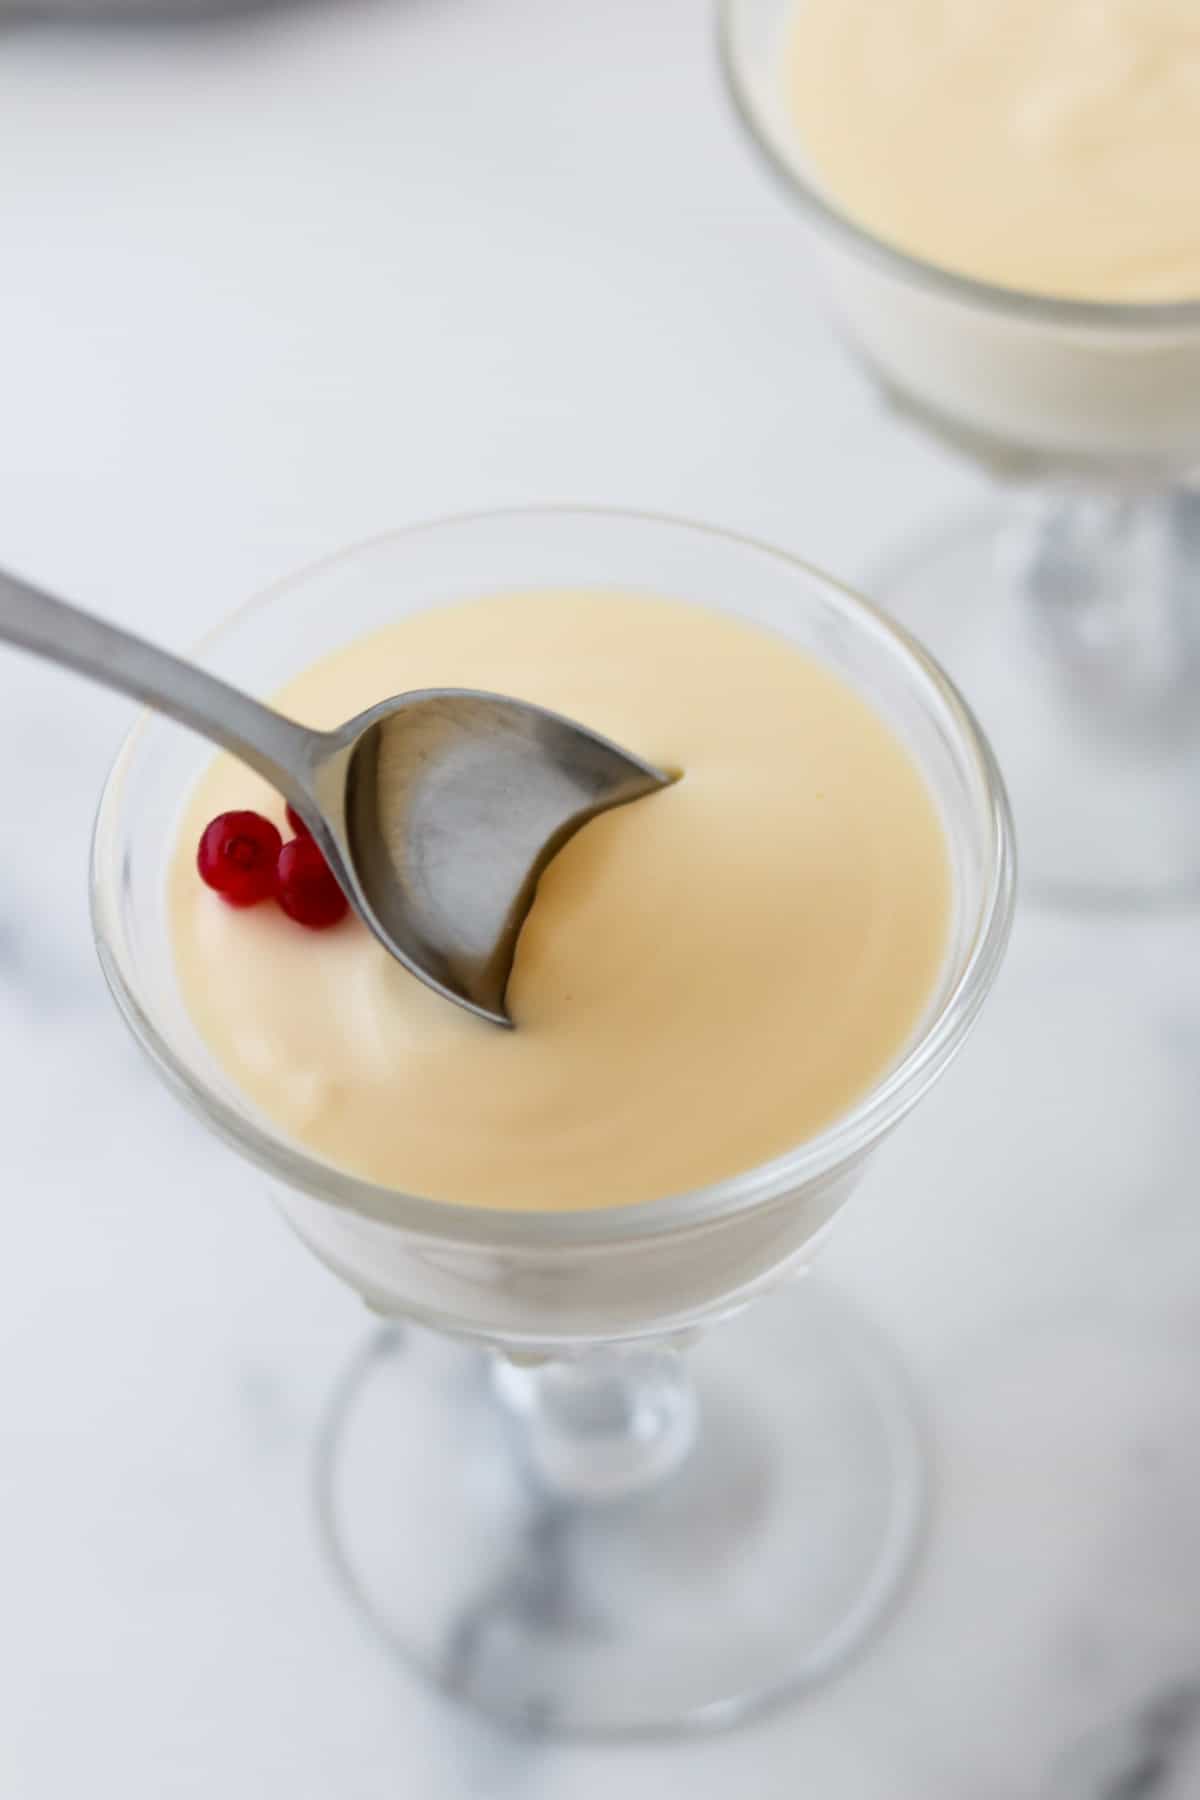 Spoon in a serving of Swedish Cream.